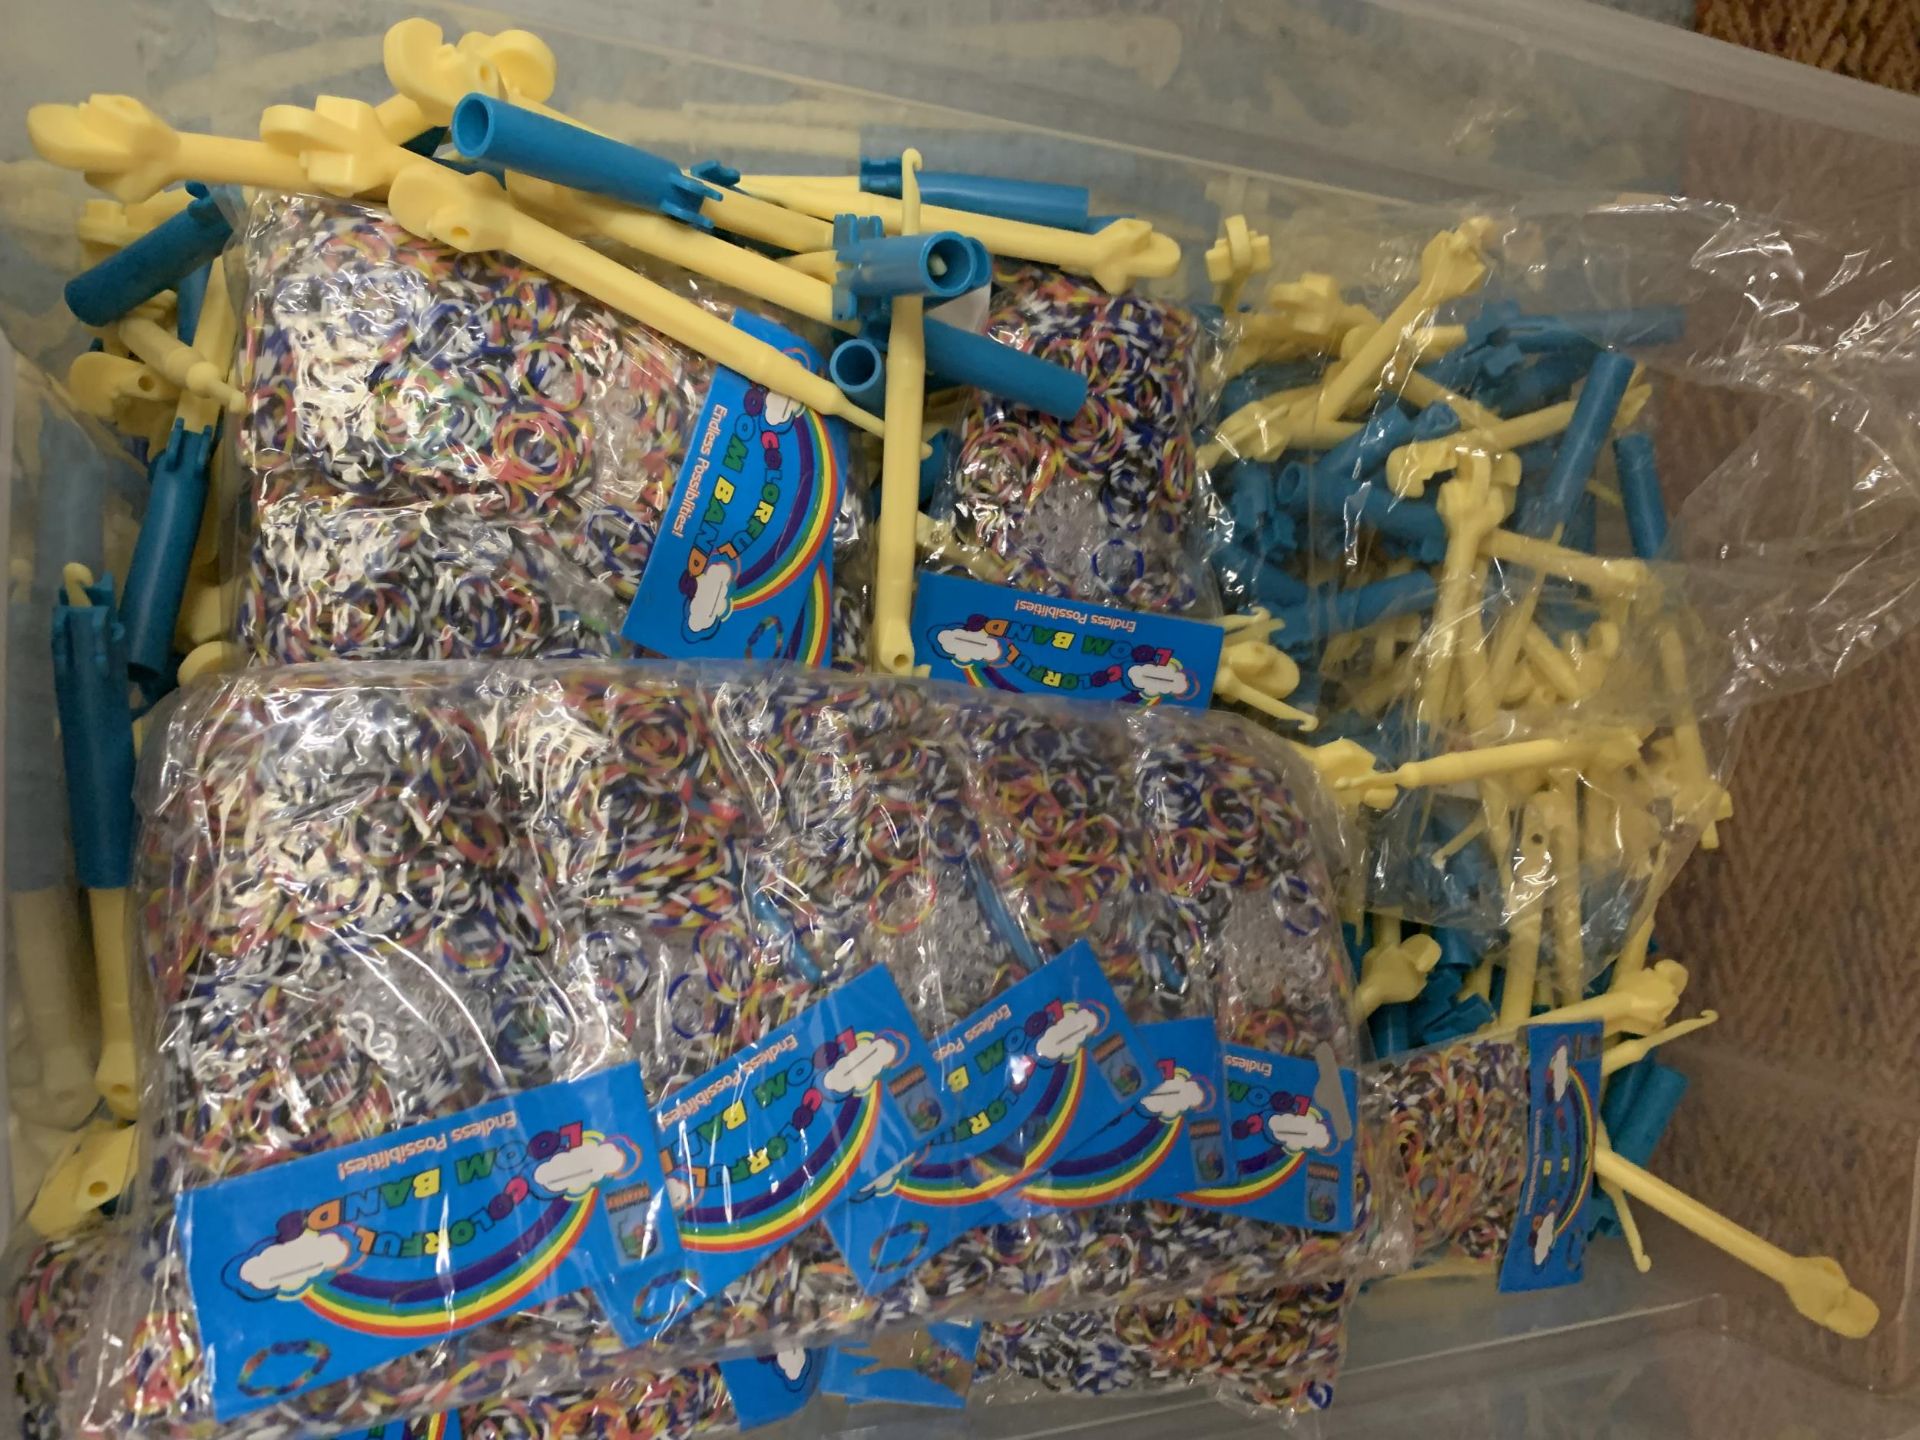 A BOX OF LOOM BANDS AND ACCESSORIES